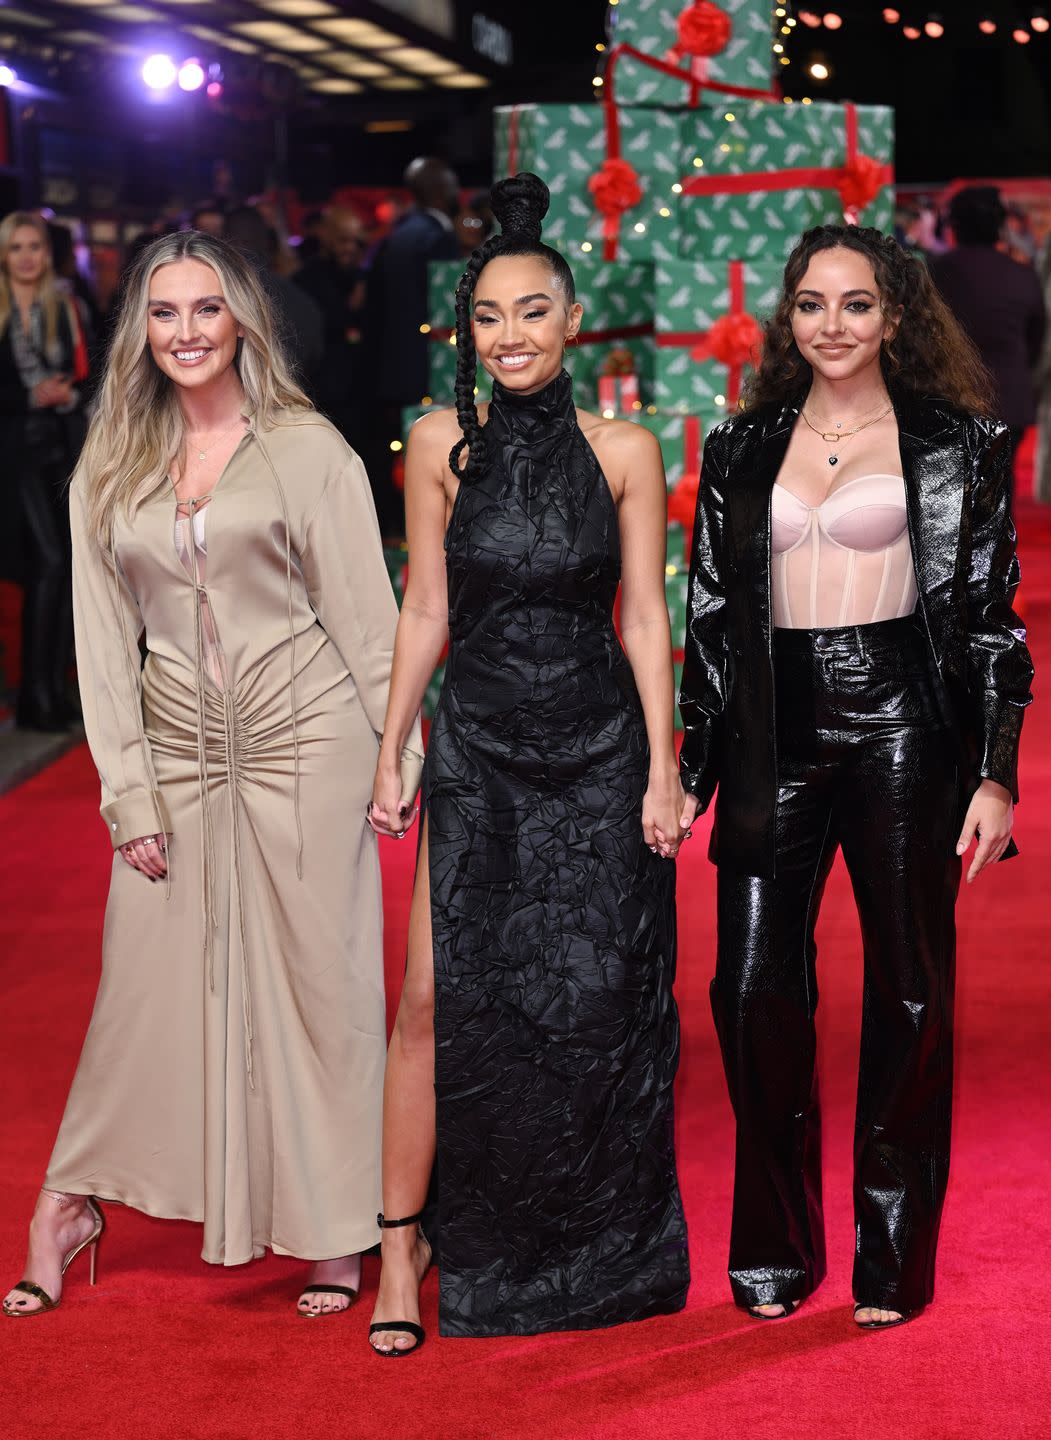 little mix stars perrie edwards, leigh anne pinnock and jade thirlwall